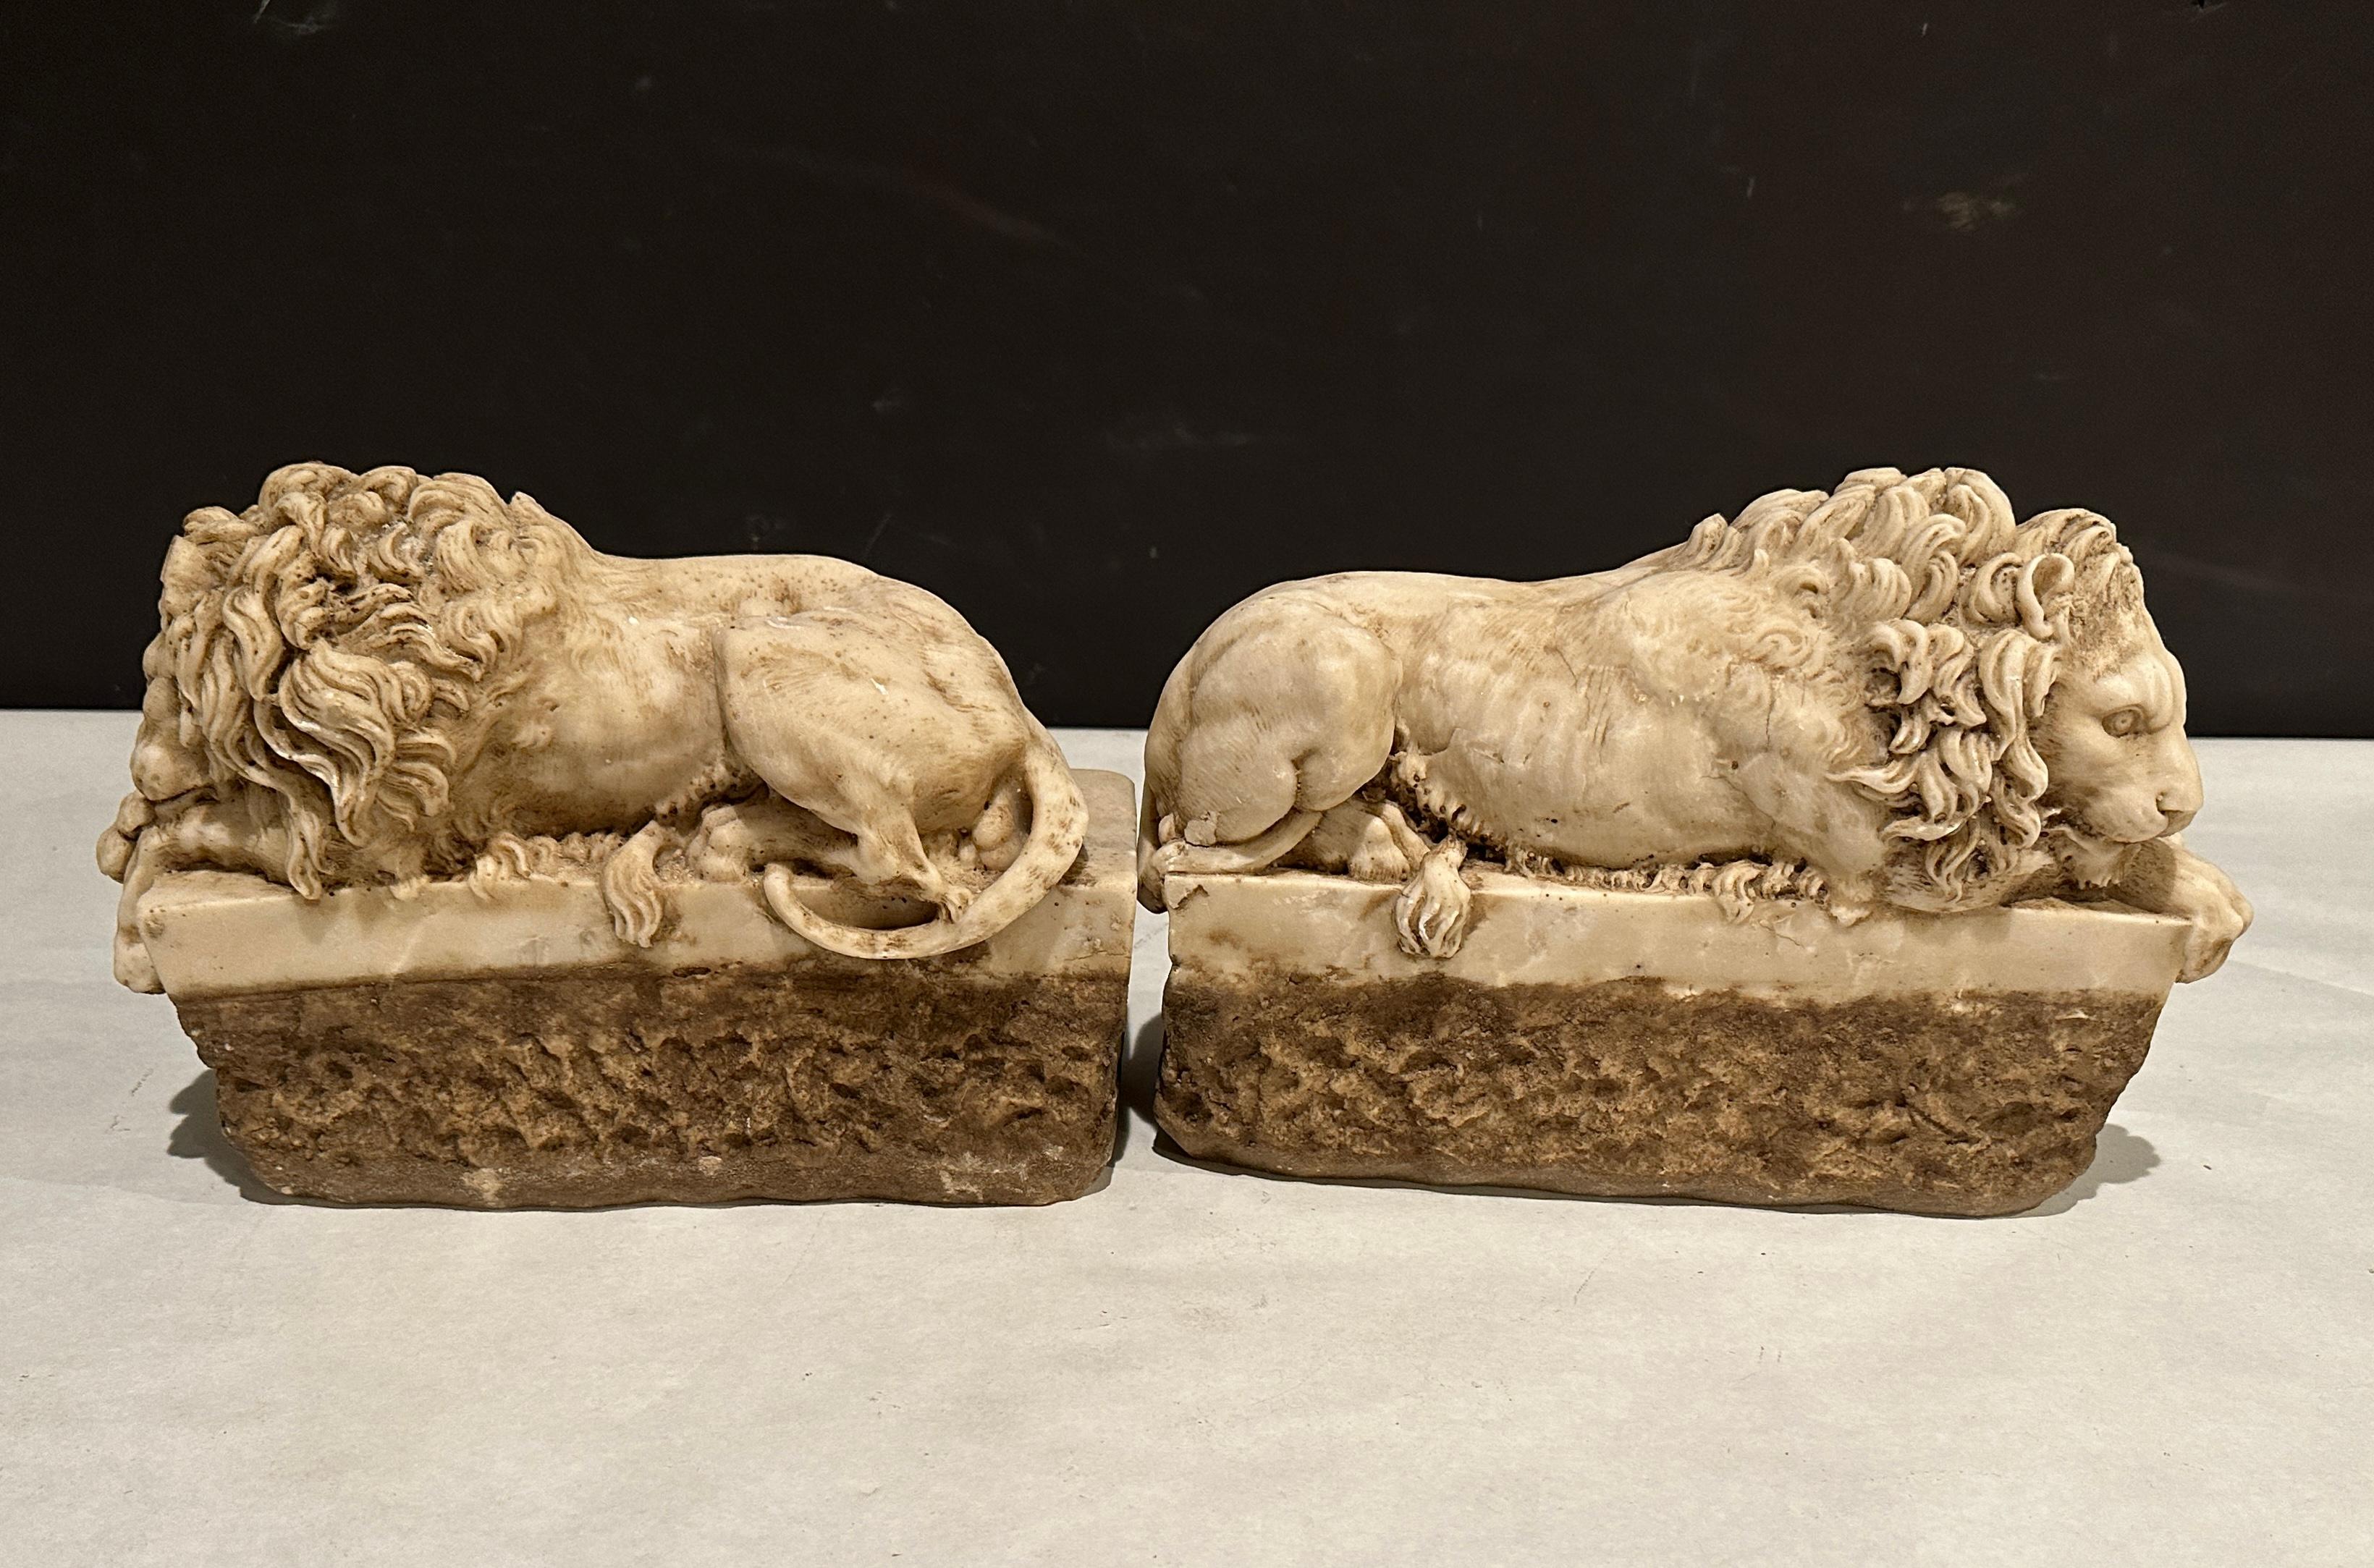 Fine quality antique carved marble recumbent lions after models by Antonio Canova. Architectural elements most likely part of a larger element or grouping.